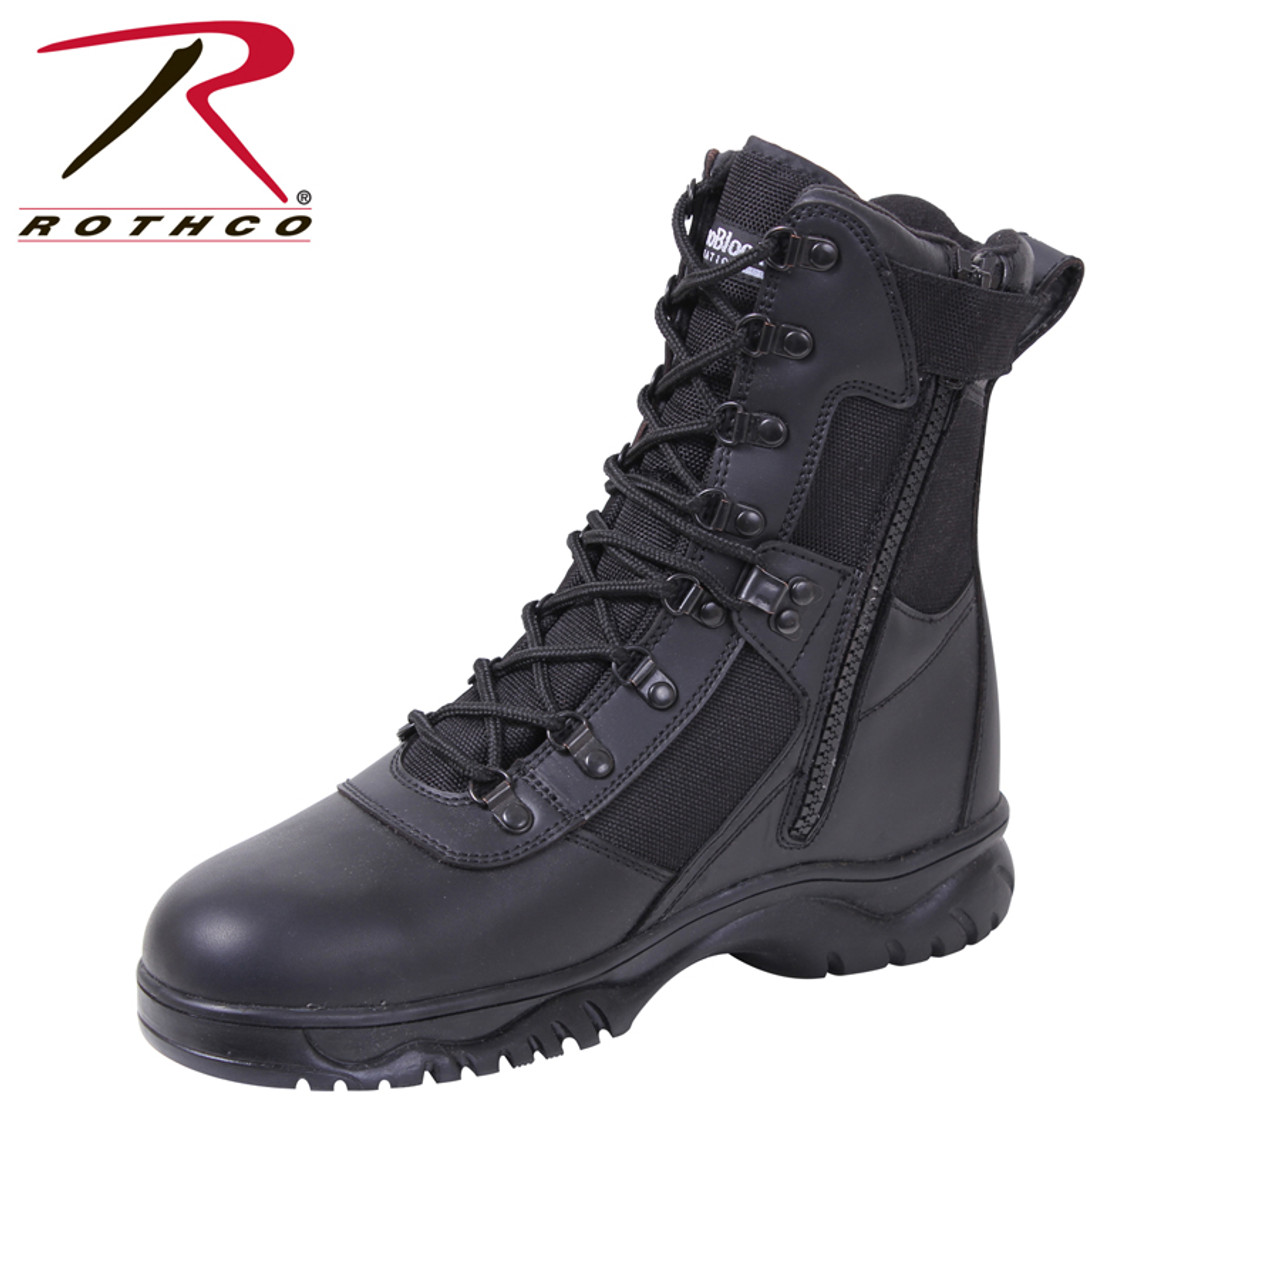 Shop Tactical Forced Entry Boots - Fatigues Army Navy Gear